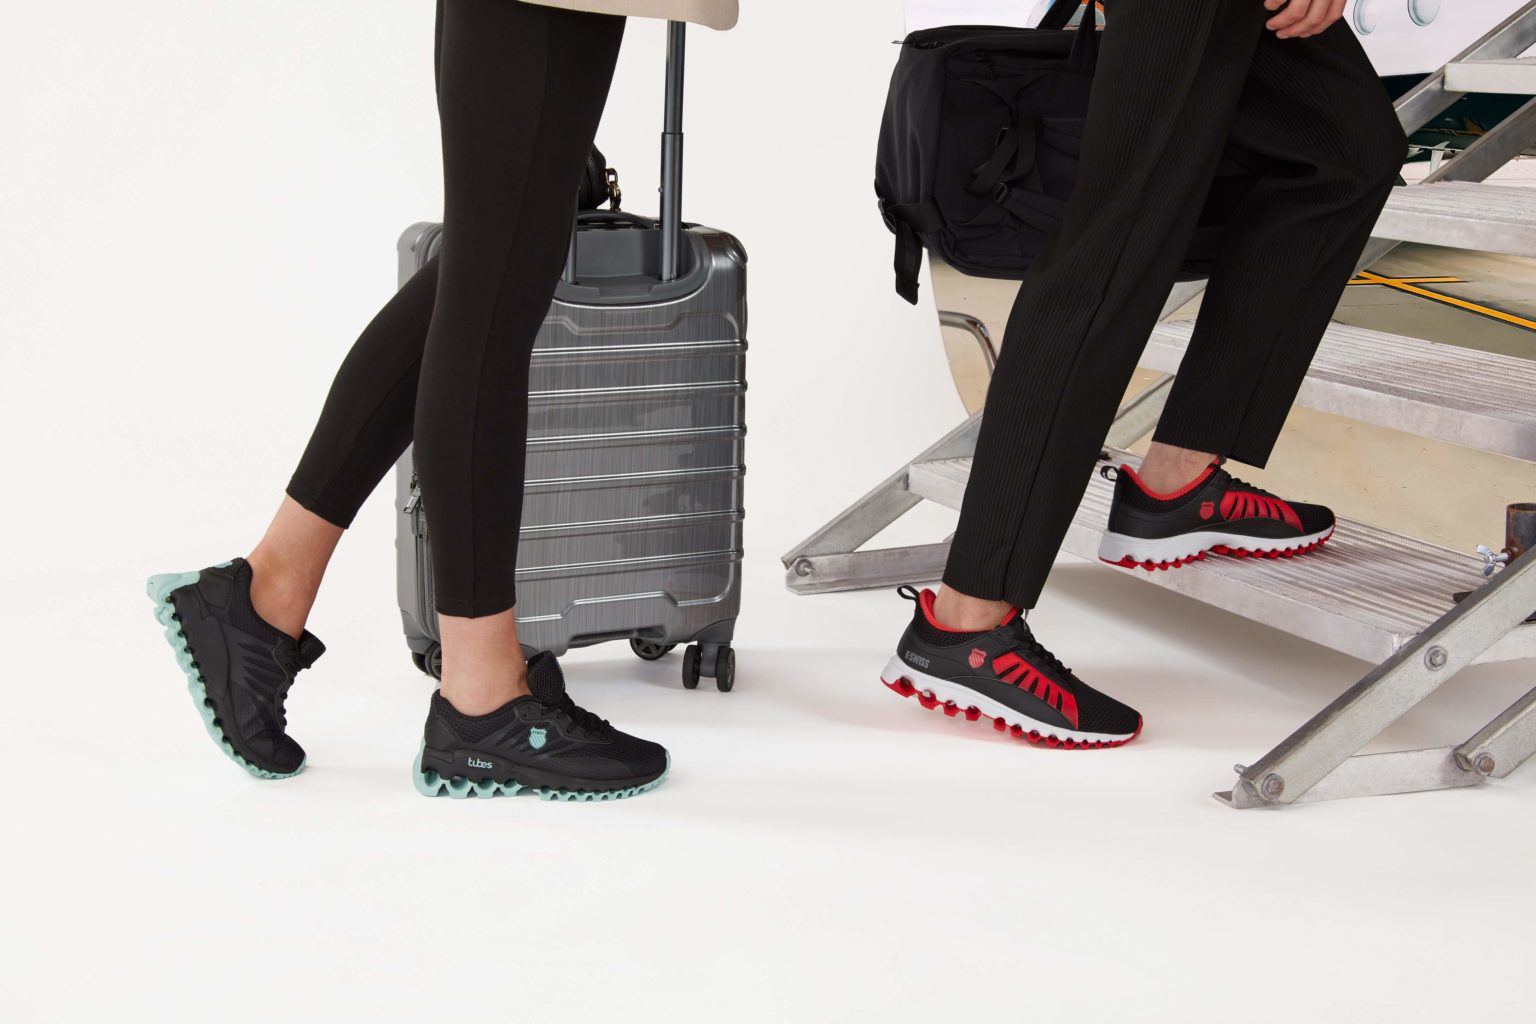 Image showing a male and female walking legs along with a travel suitcase